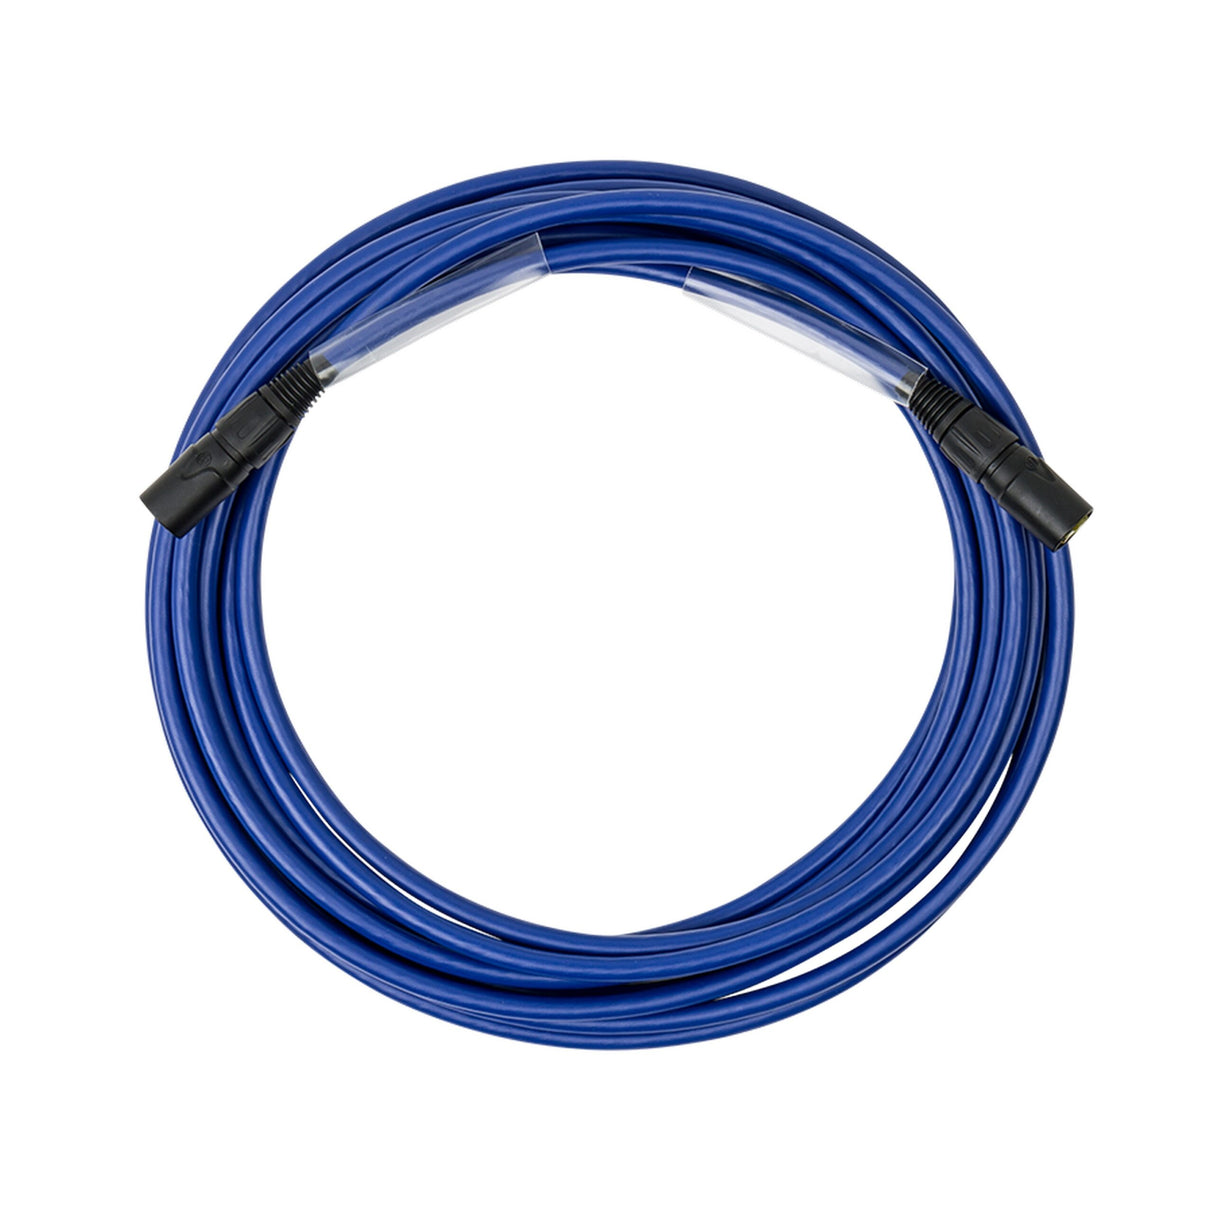 SoundTools SuperCAT Sound etherCON to etherCON CAT5e Cable, Blue, 1 Meter